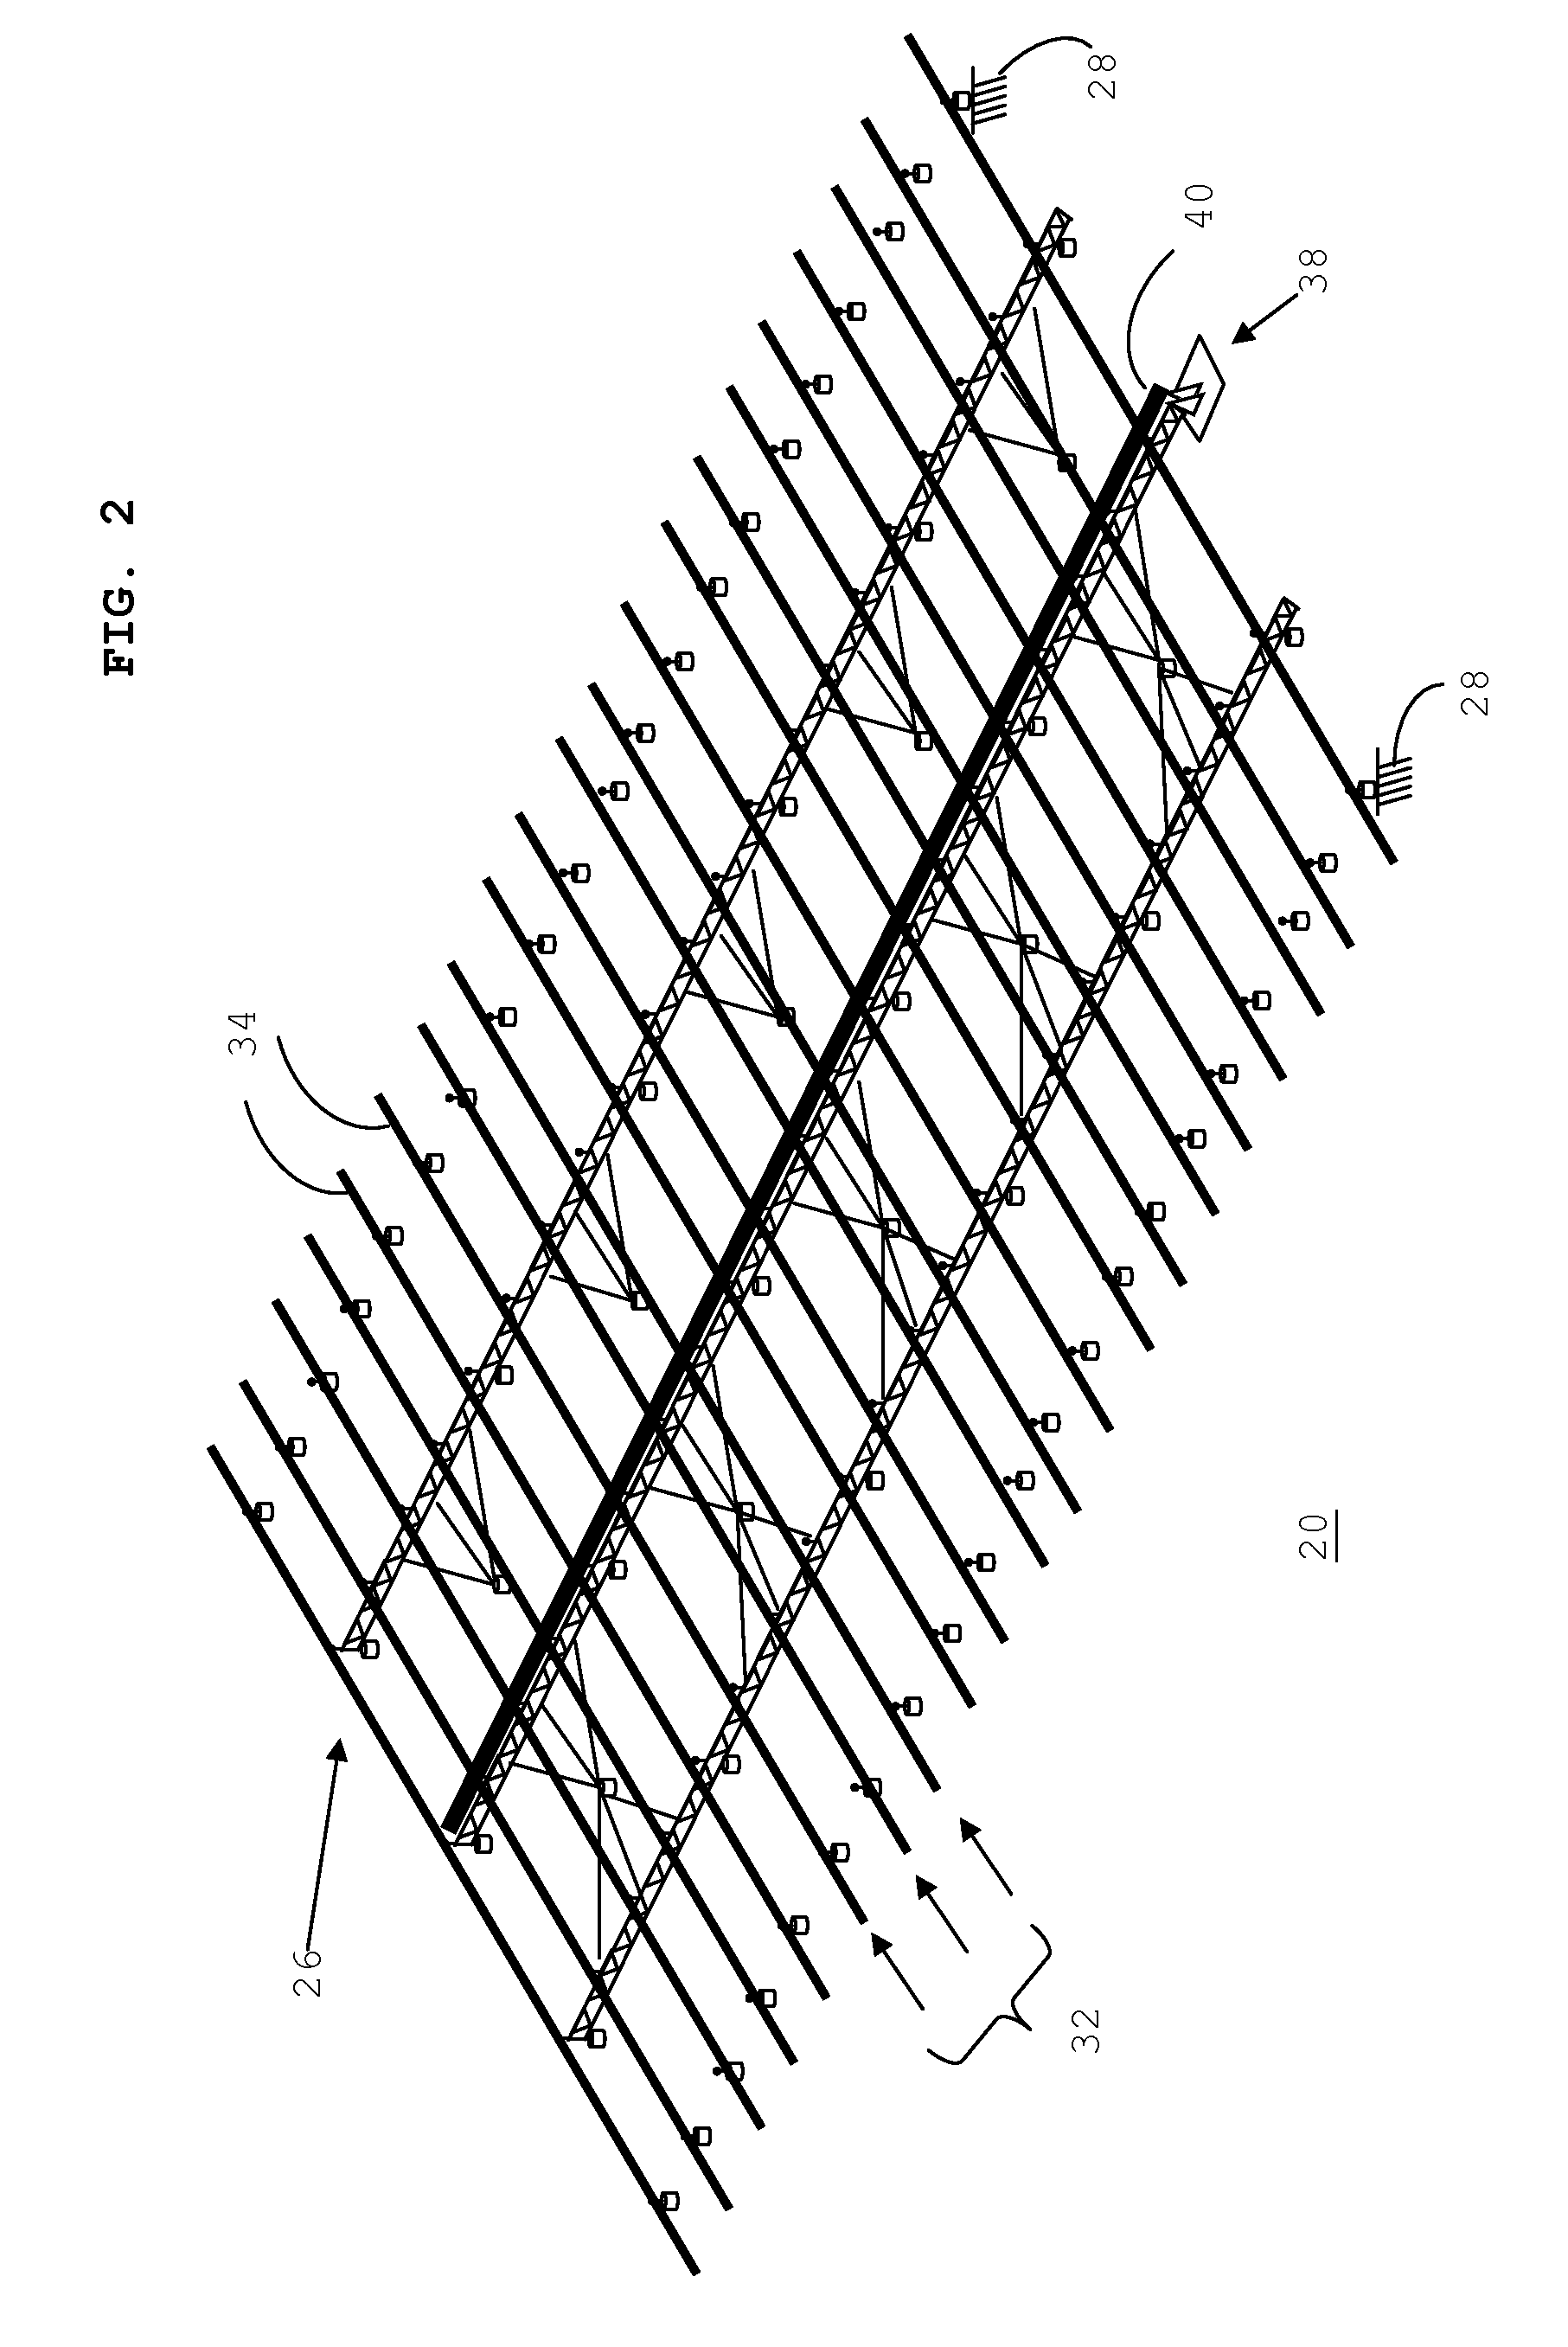 System for supporting energy conversion modules